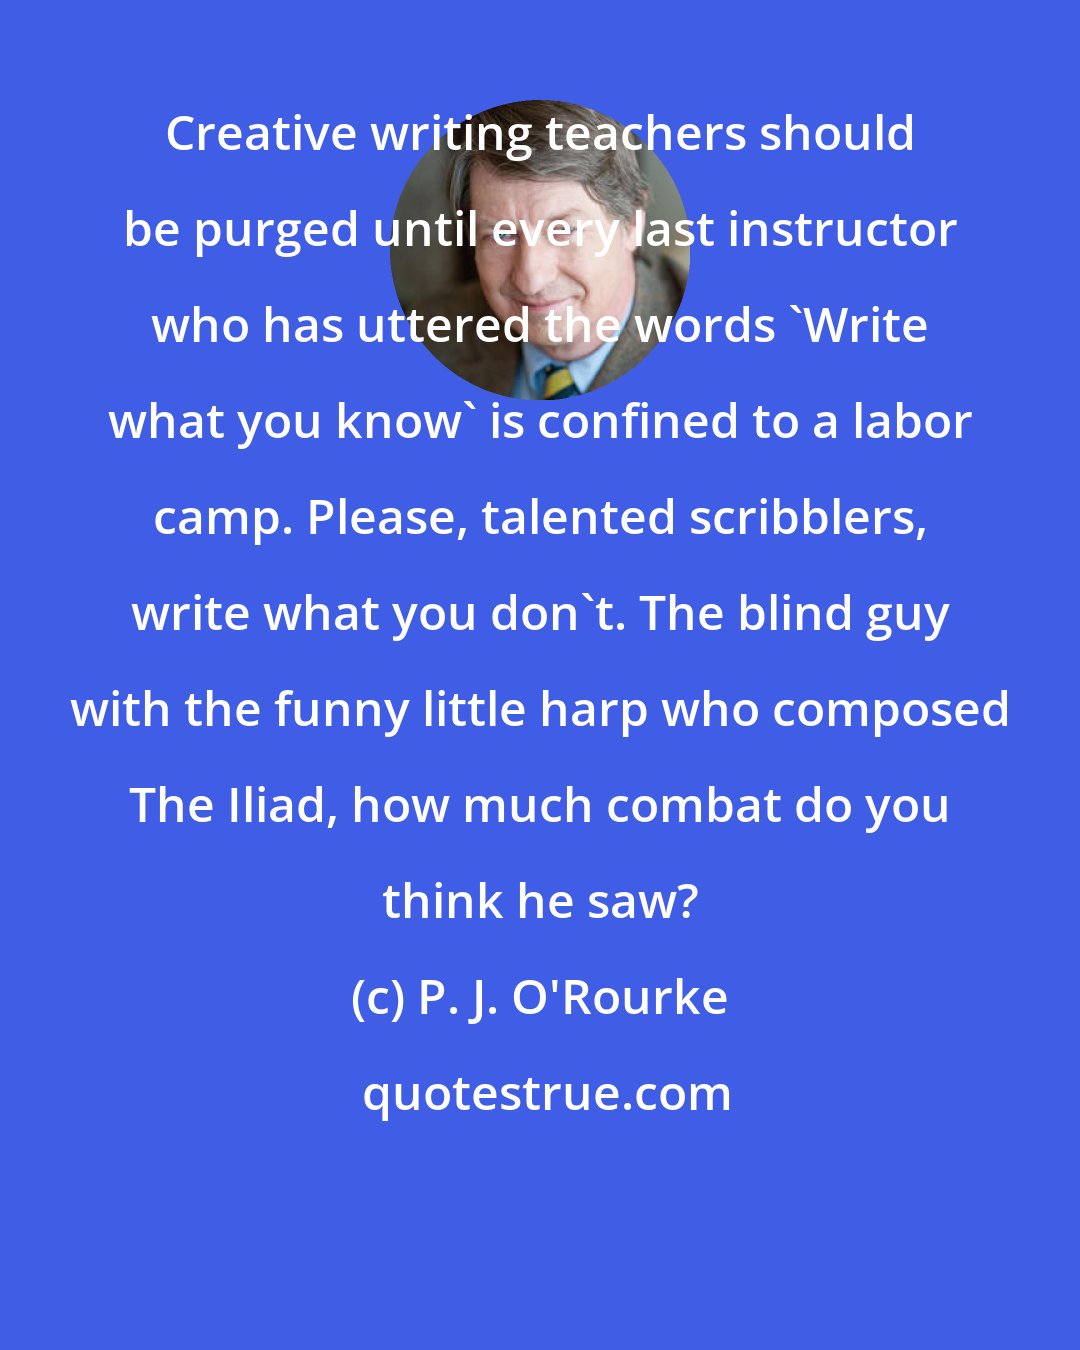 P. J. O'Rourke: Creative writing teachers should be purged until every last instructor who has uttered the words 'Write what you know' is confined to a labor camp. Please, talented scribblers, write what you don't. The blind guy with the funny little harp who composed The Iliad, how much combat do you think he saw?